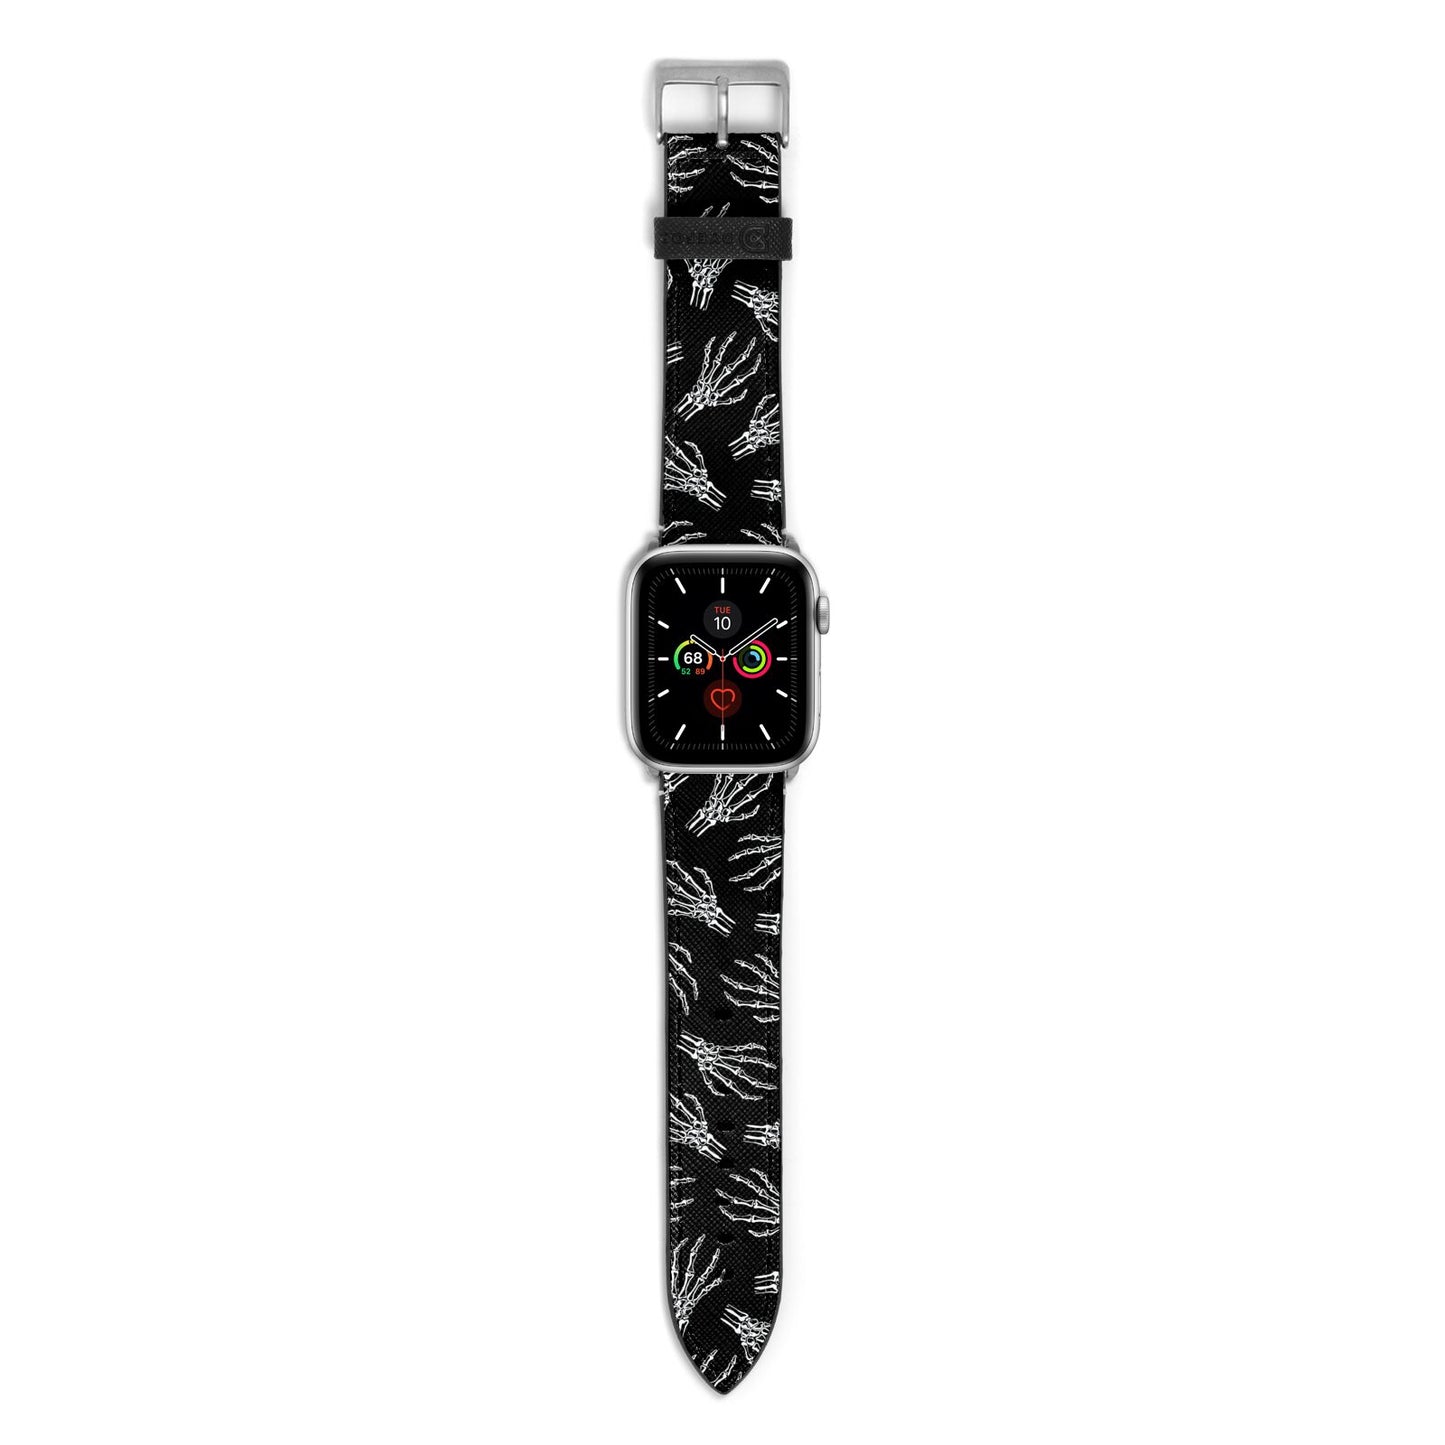 Skeleton Hands Apple Watch Strap with Silver Hardware